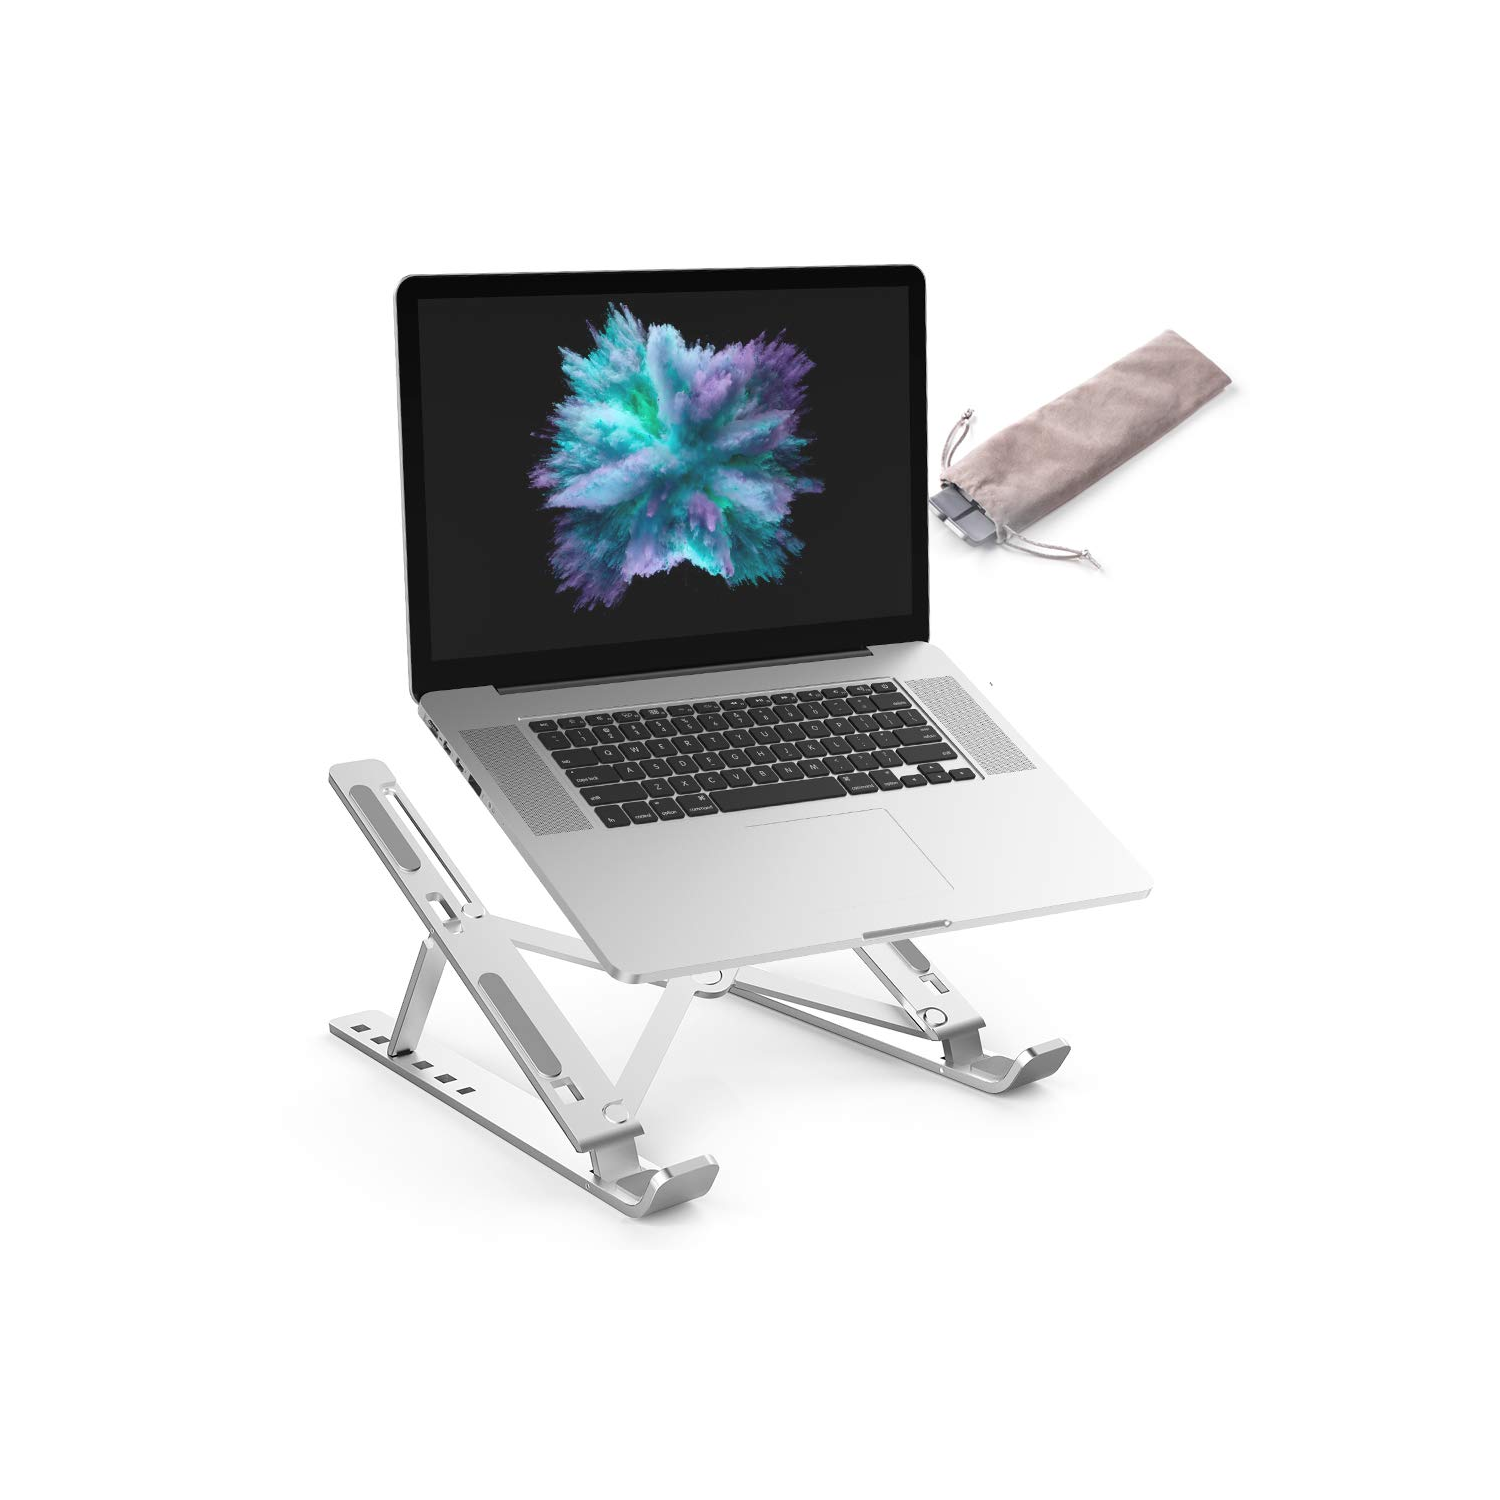 Tasshz Laptop Stand, Height Adjustable Computer Stand for 10-15.6 inch; iPads & Tablets (Silver)